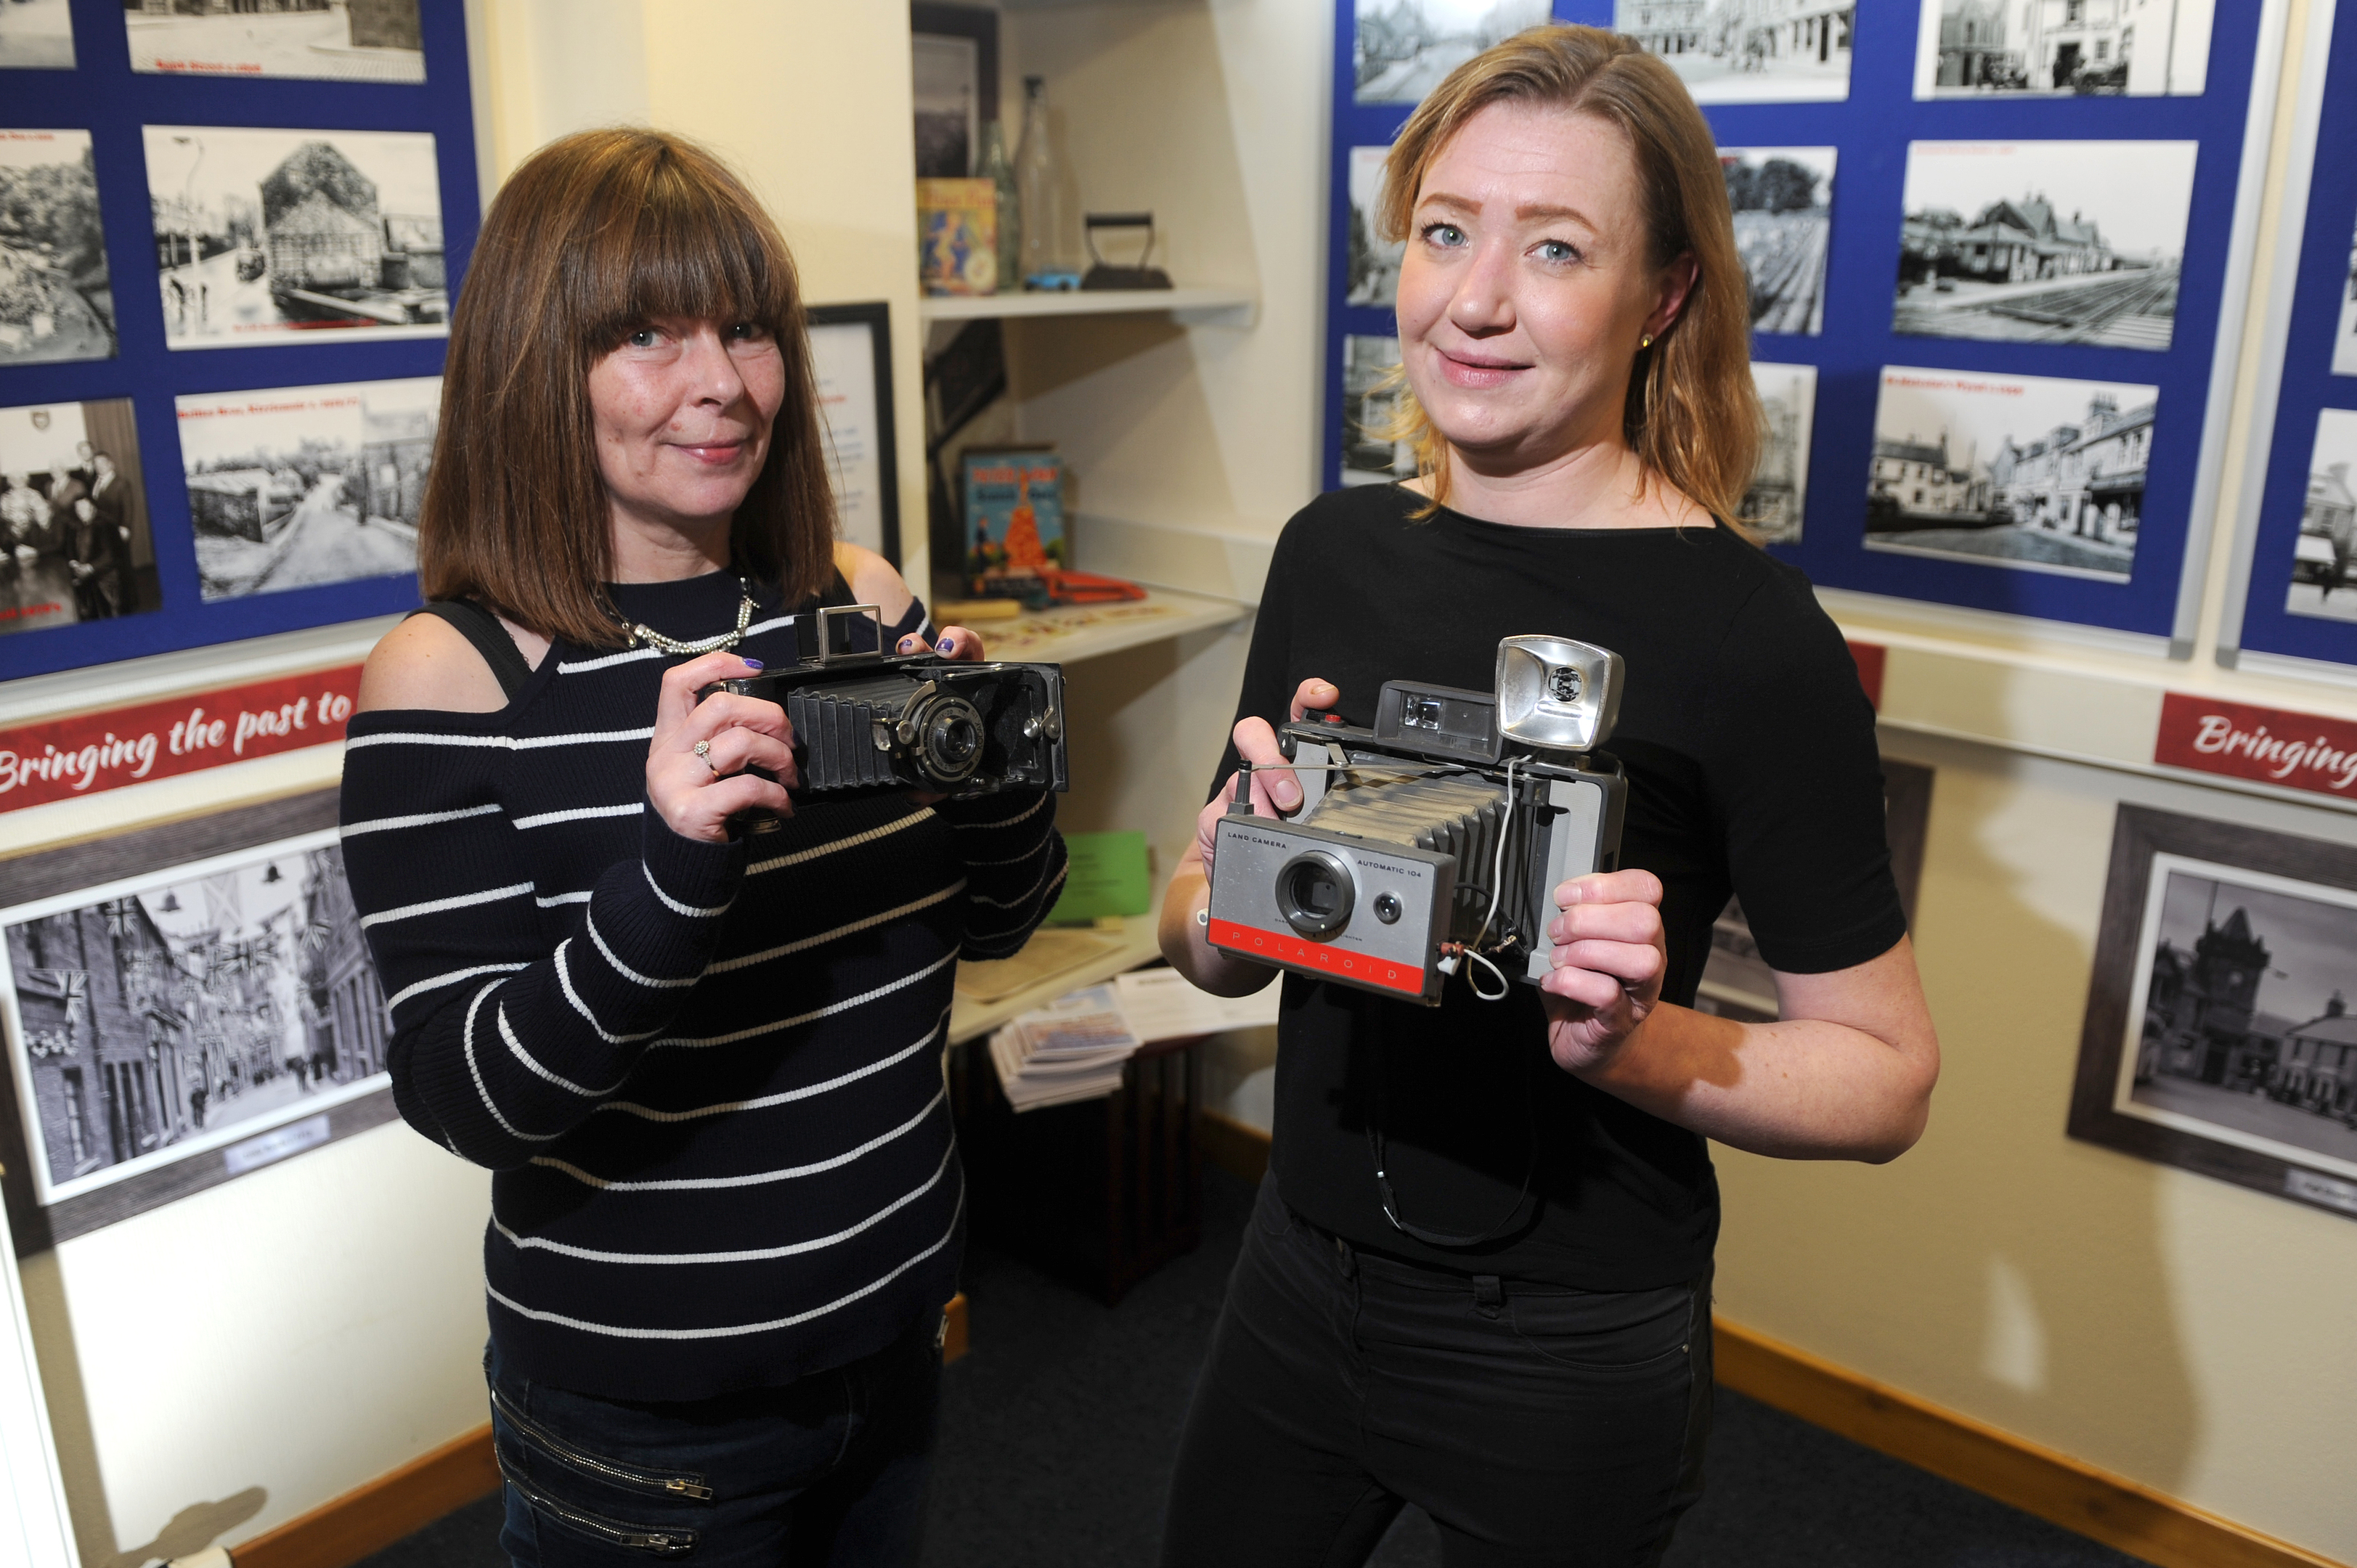 Elaine Findlay and Vivien Ogilvy have a sneak preview of the exhibition and check out vintage cameras which might have taken some of the photographs